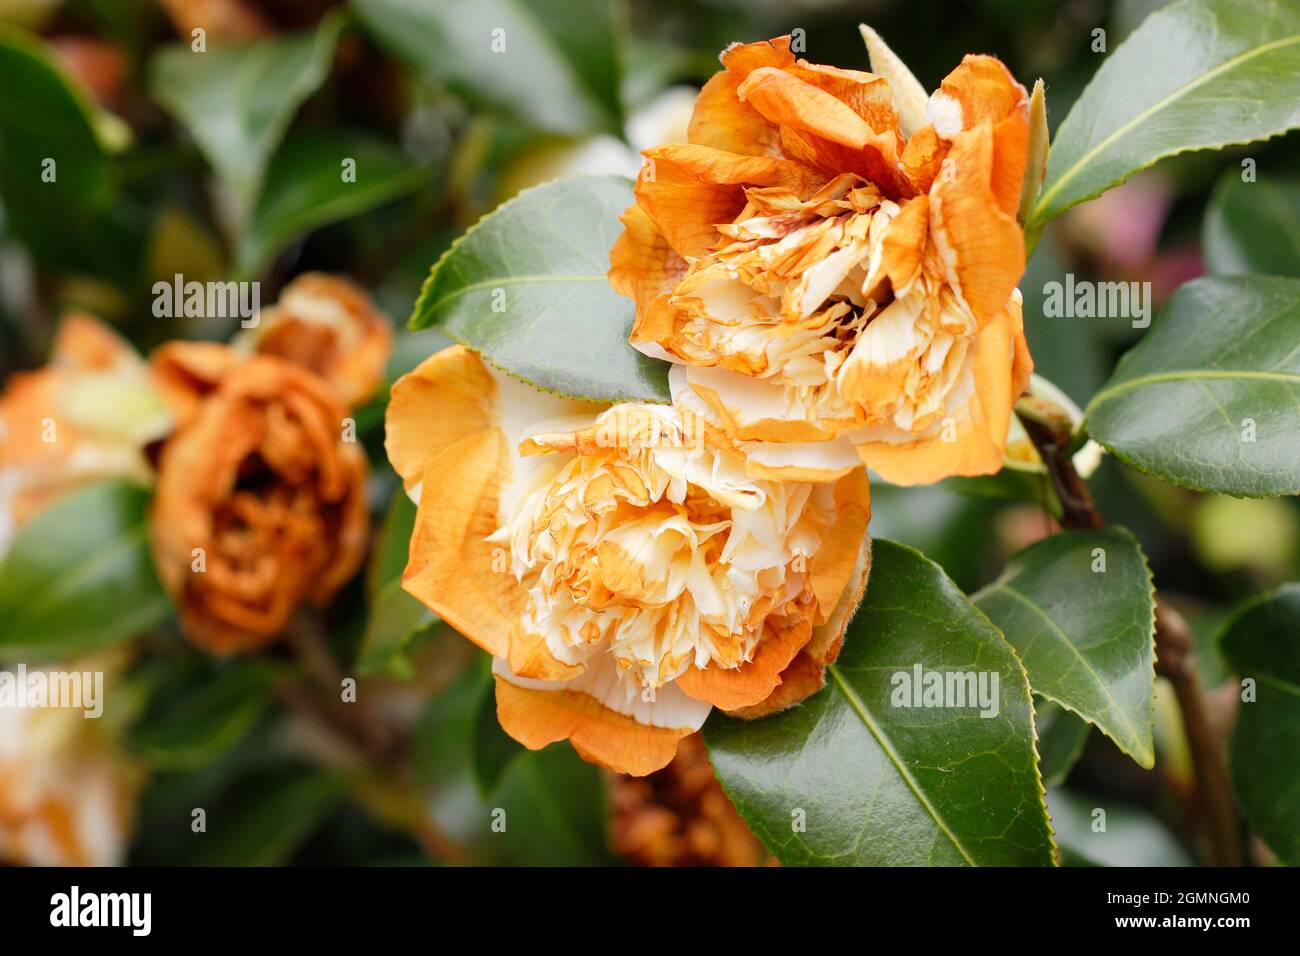 Frost sensitive camellia blooms damaged by freezing weather conditions in spring. UK Stock Photo